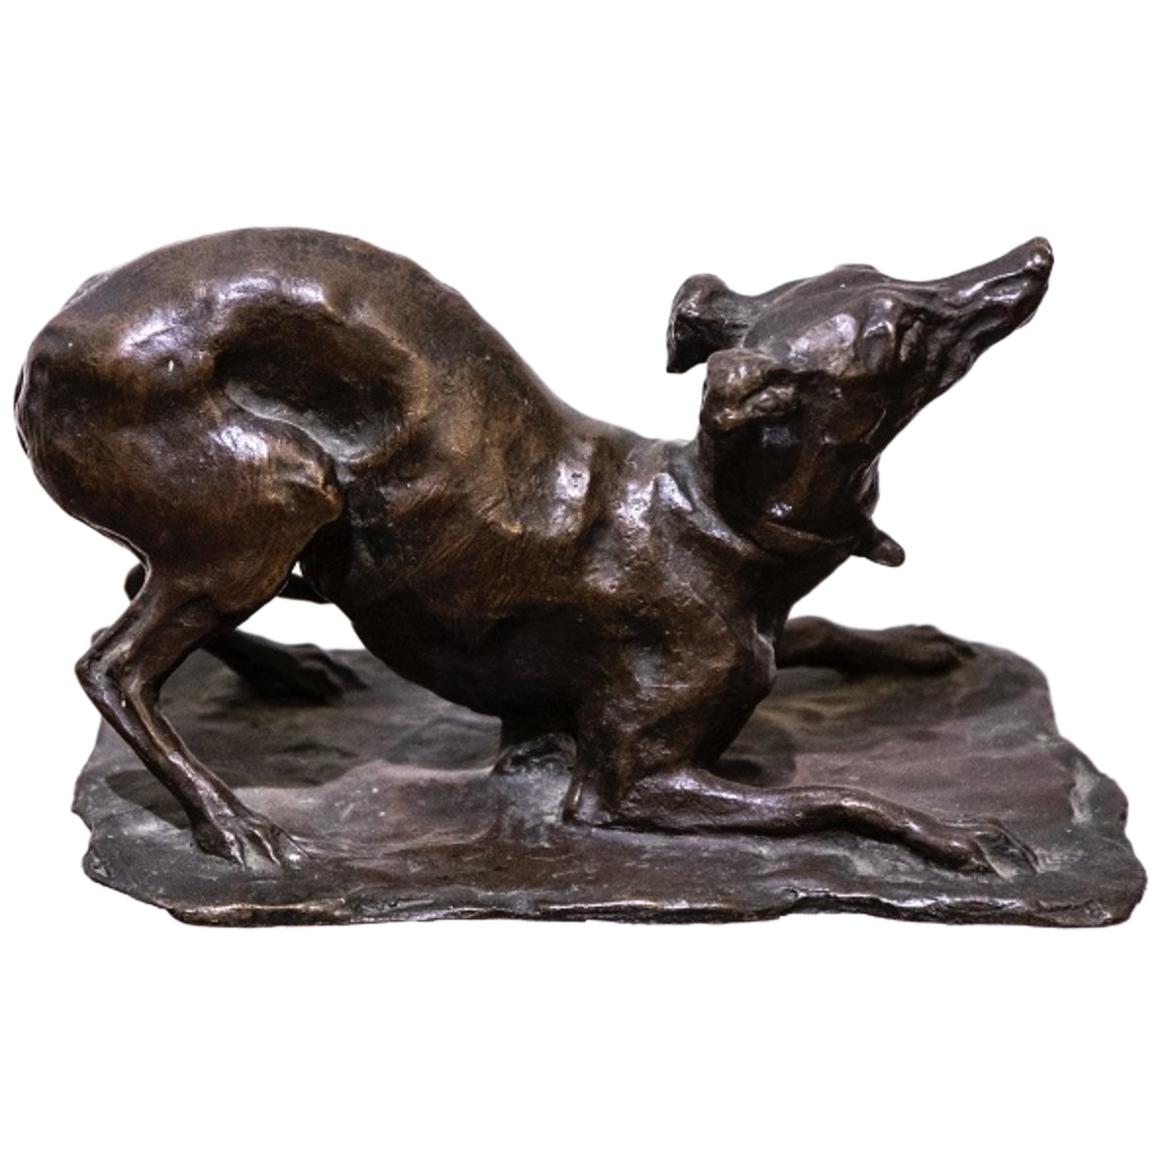 Dog, Bronze Sculpture by Odoardo Tabacchi, Early 20th Century